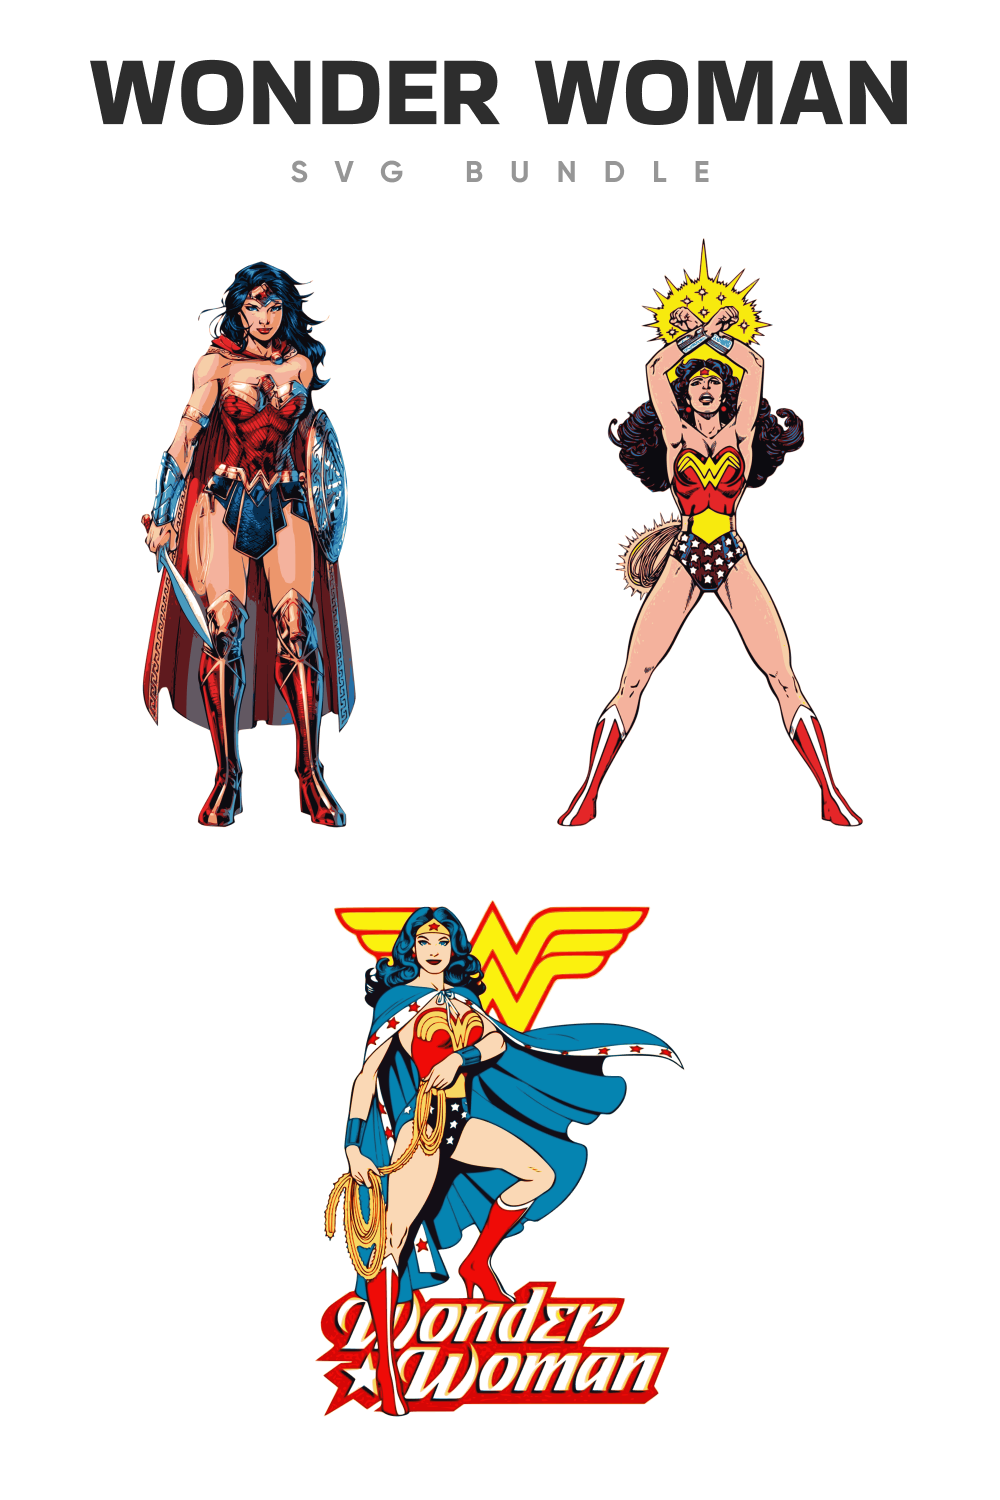 Three options of the Wonder Women characters.